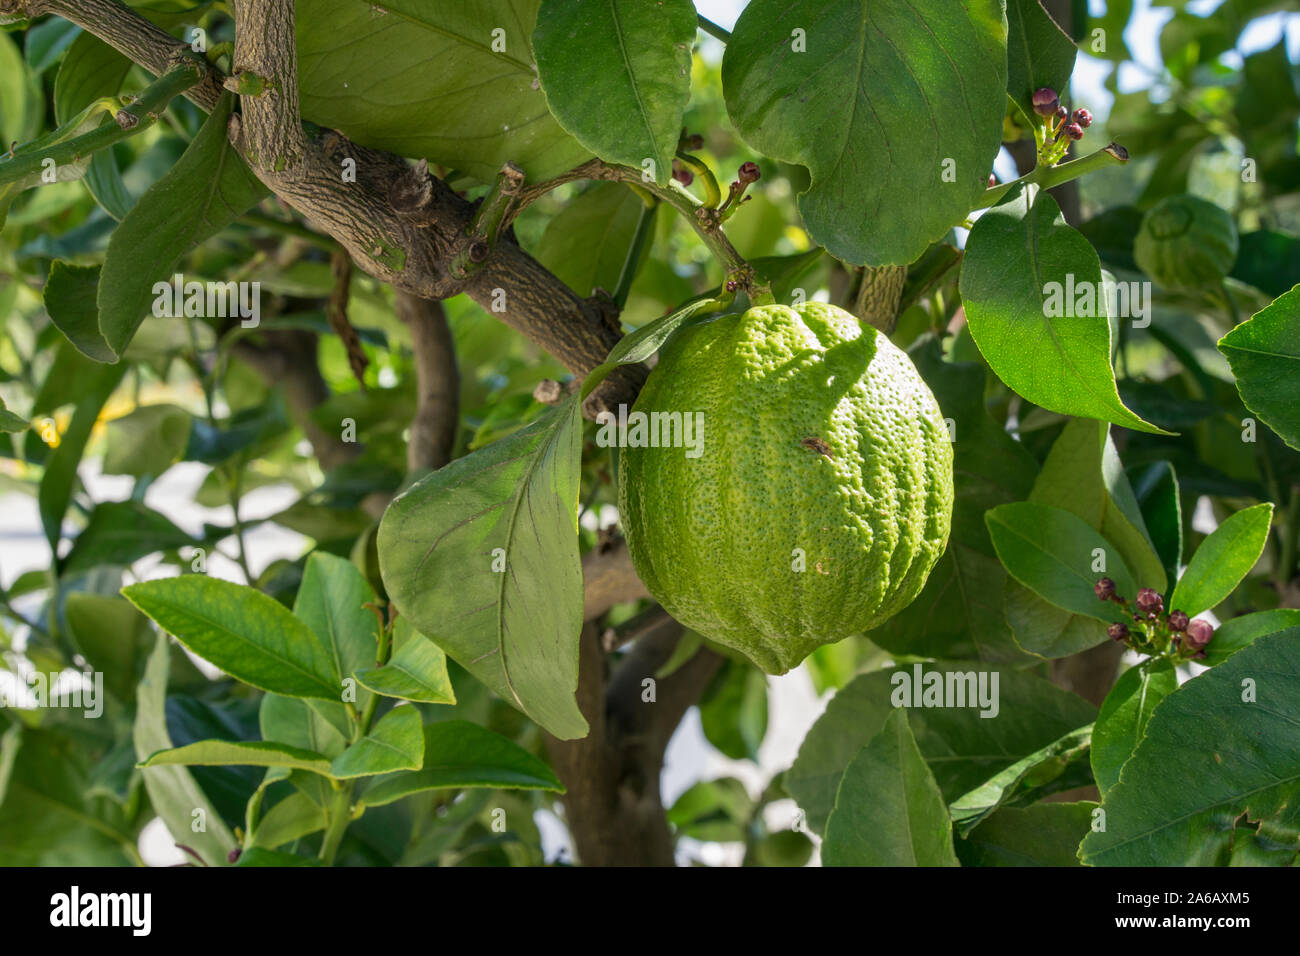 Close up view of a citrus tree. Green limes or lemons with the leaves of a citrus plant. Stock Photo